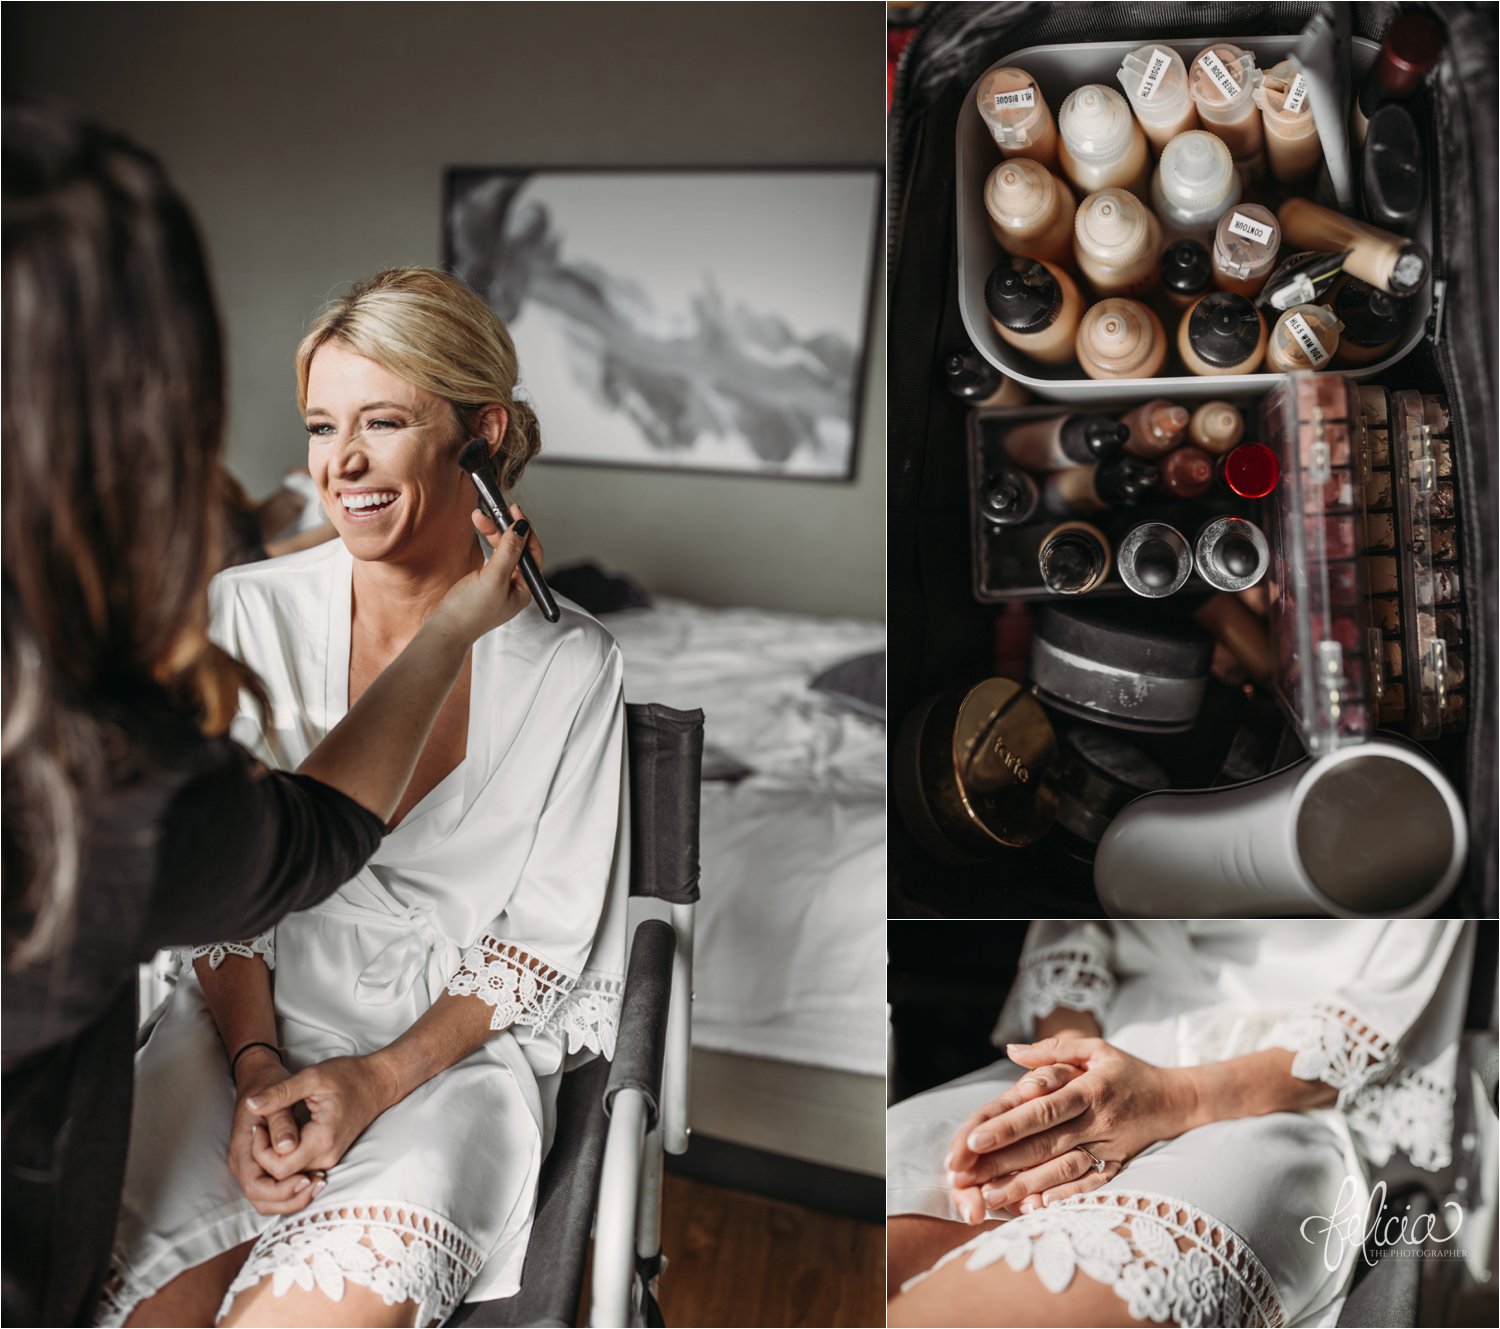 images by feliciathephotographer.com | destination wedding photographer | kansas city | eighteen ninety | classic | getting ready | details | pre ceremony | rachel naster | make up | white lace robe | 